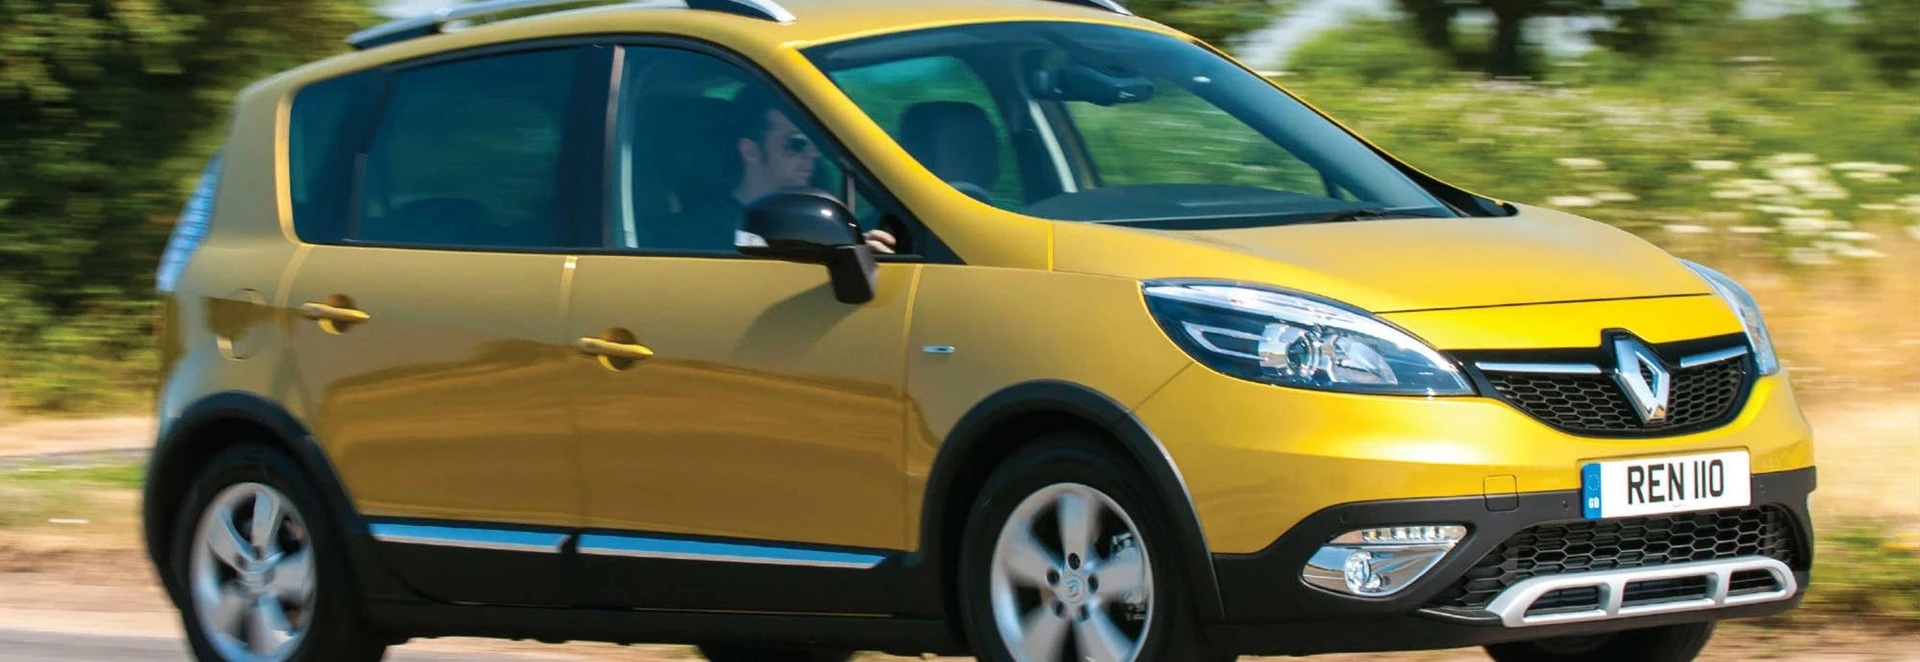 Renault Scenic XMOD MPV review 